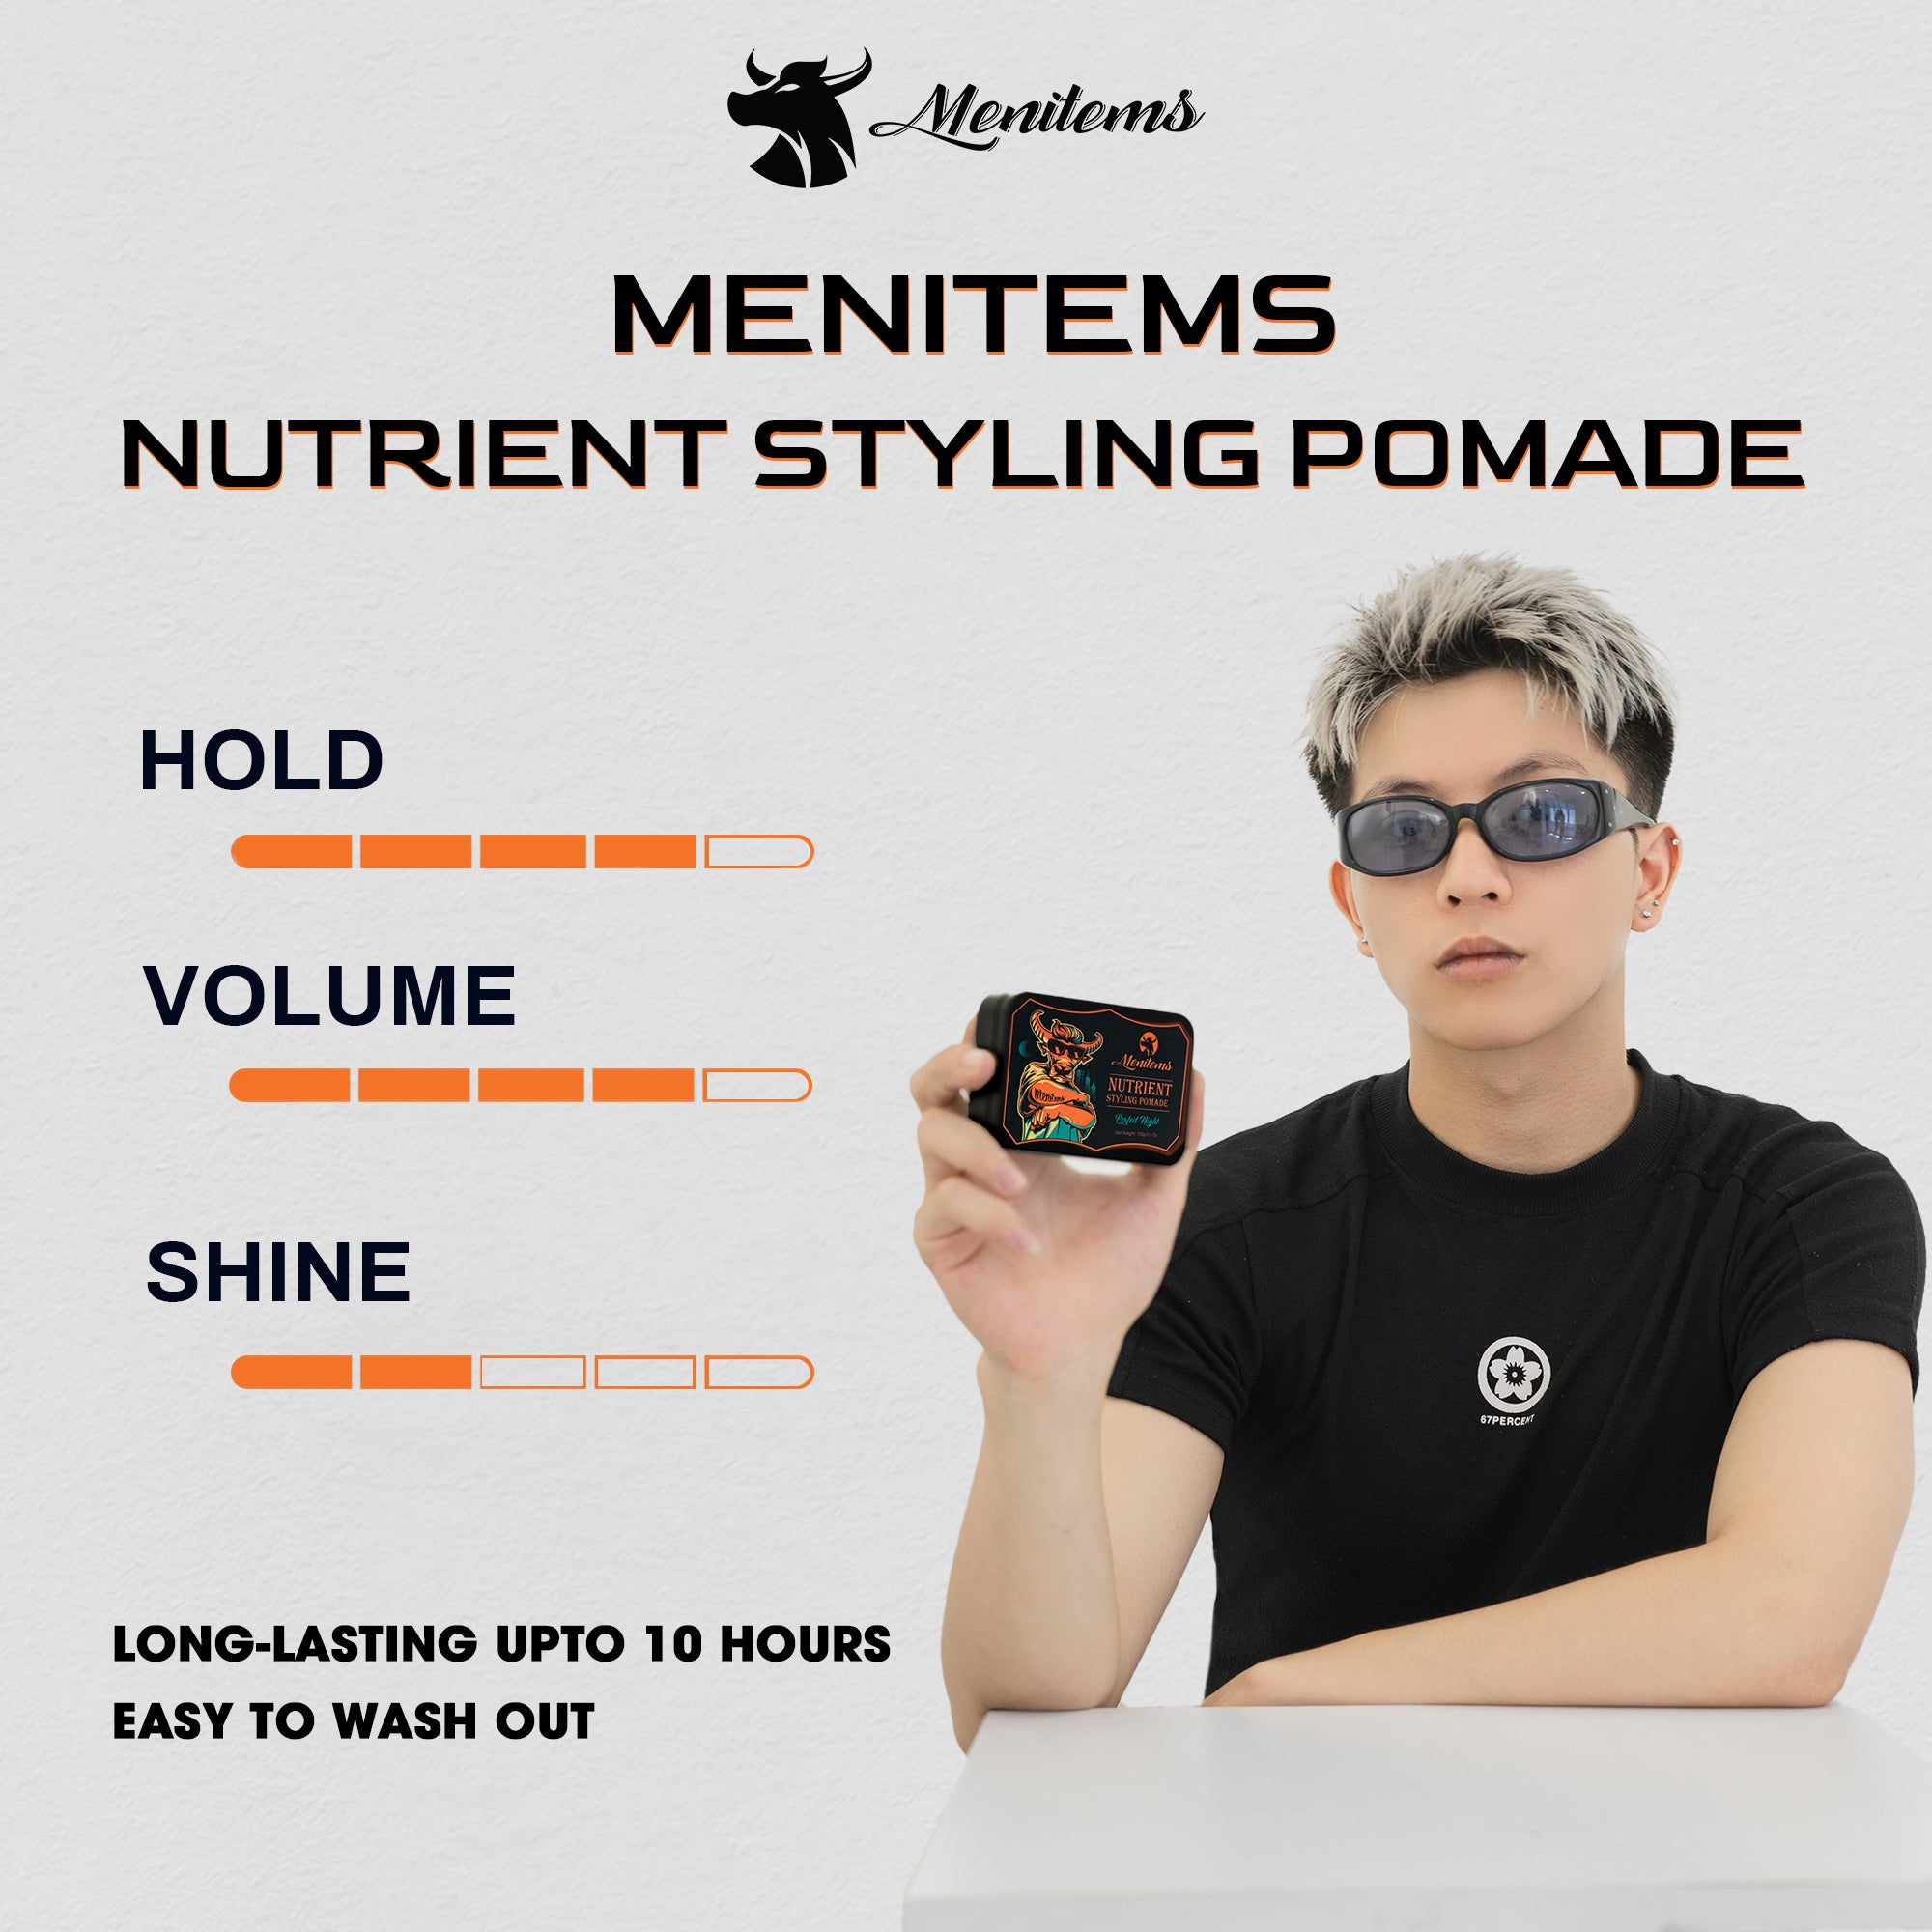 Nutrient Styling Pomade - Perfect Night 50gr